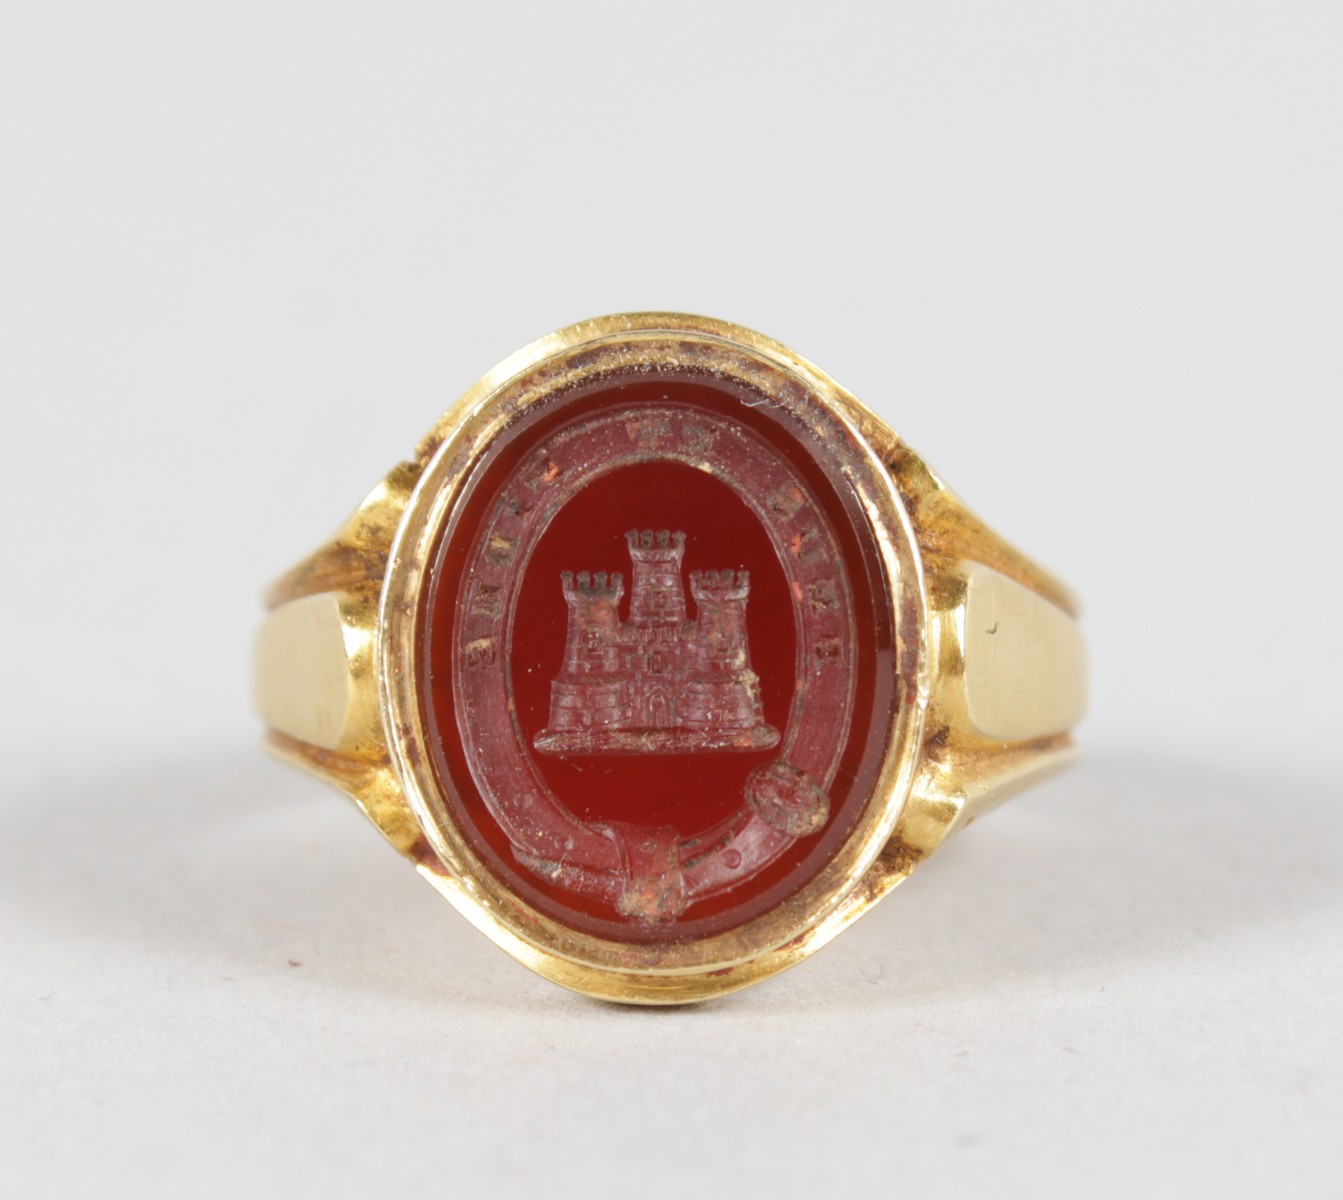 THREE 18CT YELLOW GOLD SEAL RINGS, a three turret castle. - Image 4 of 7